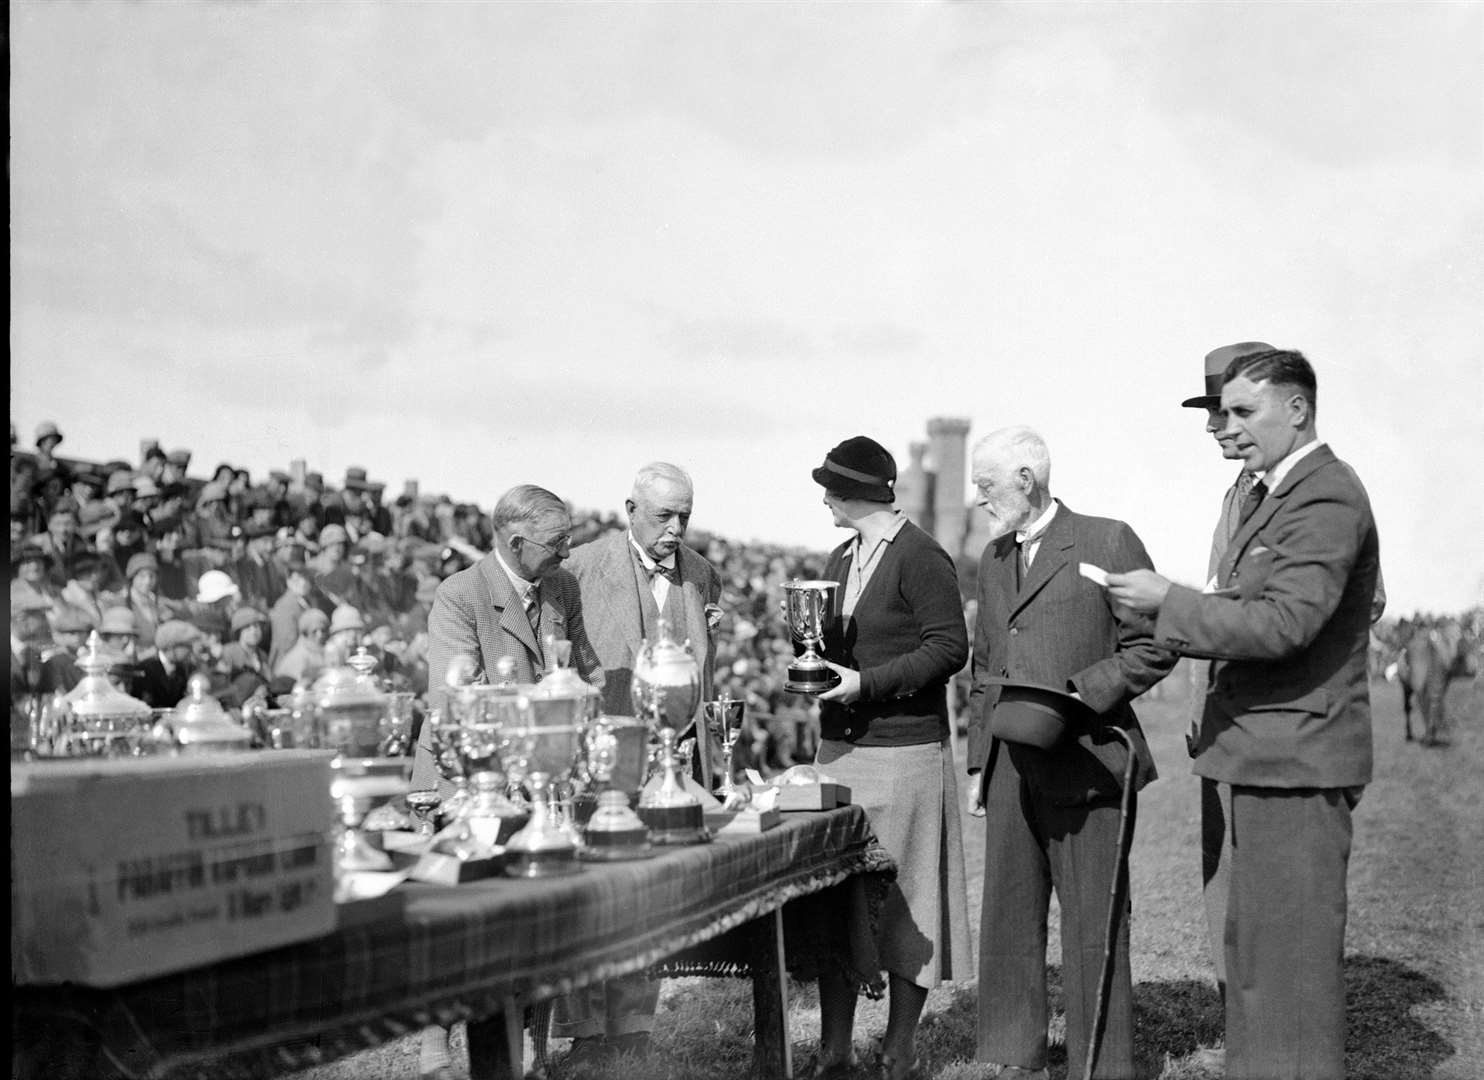 Prize presentation at the centenary show with the Duke of Portland (second from left), Marigold Sinclair, Sir Archibald’s wife, and Charles Davidson, Cogle Farm, Watten, the oldest member of the society who attended 72 shows without a break. Picture courtesy of the Wick Society, Johnston Collection